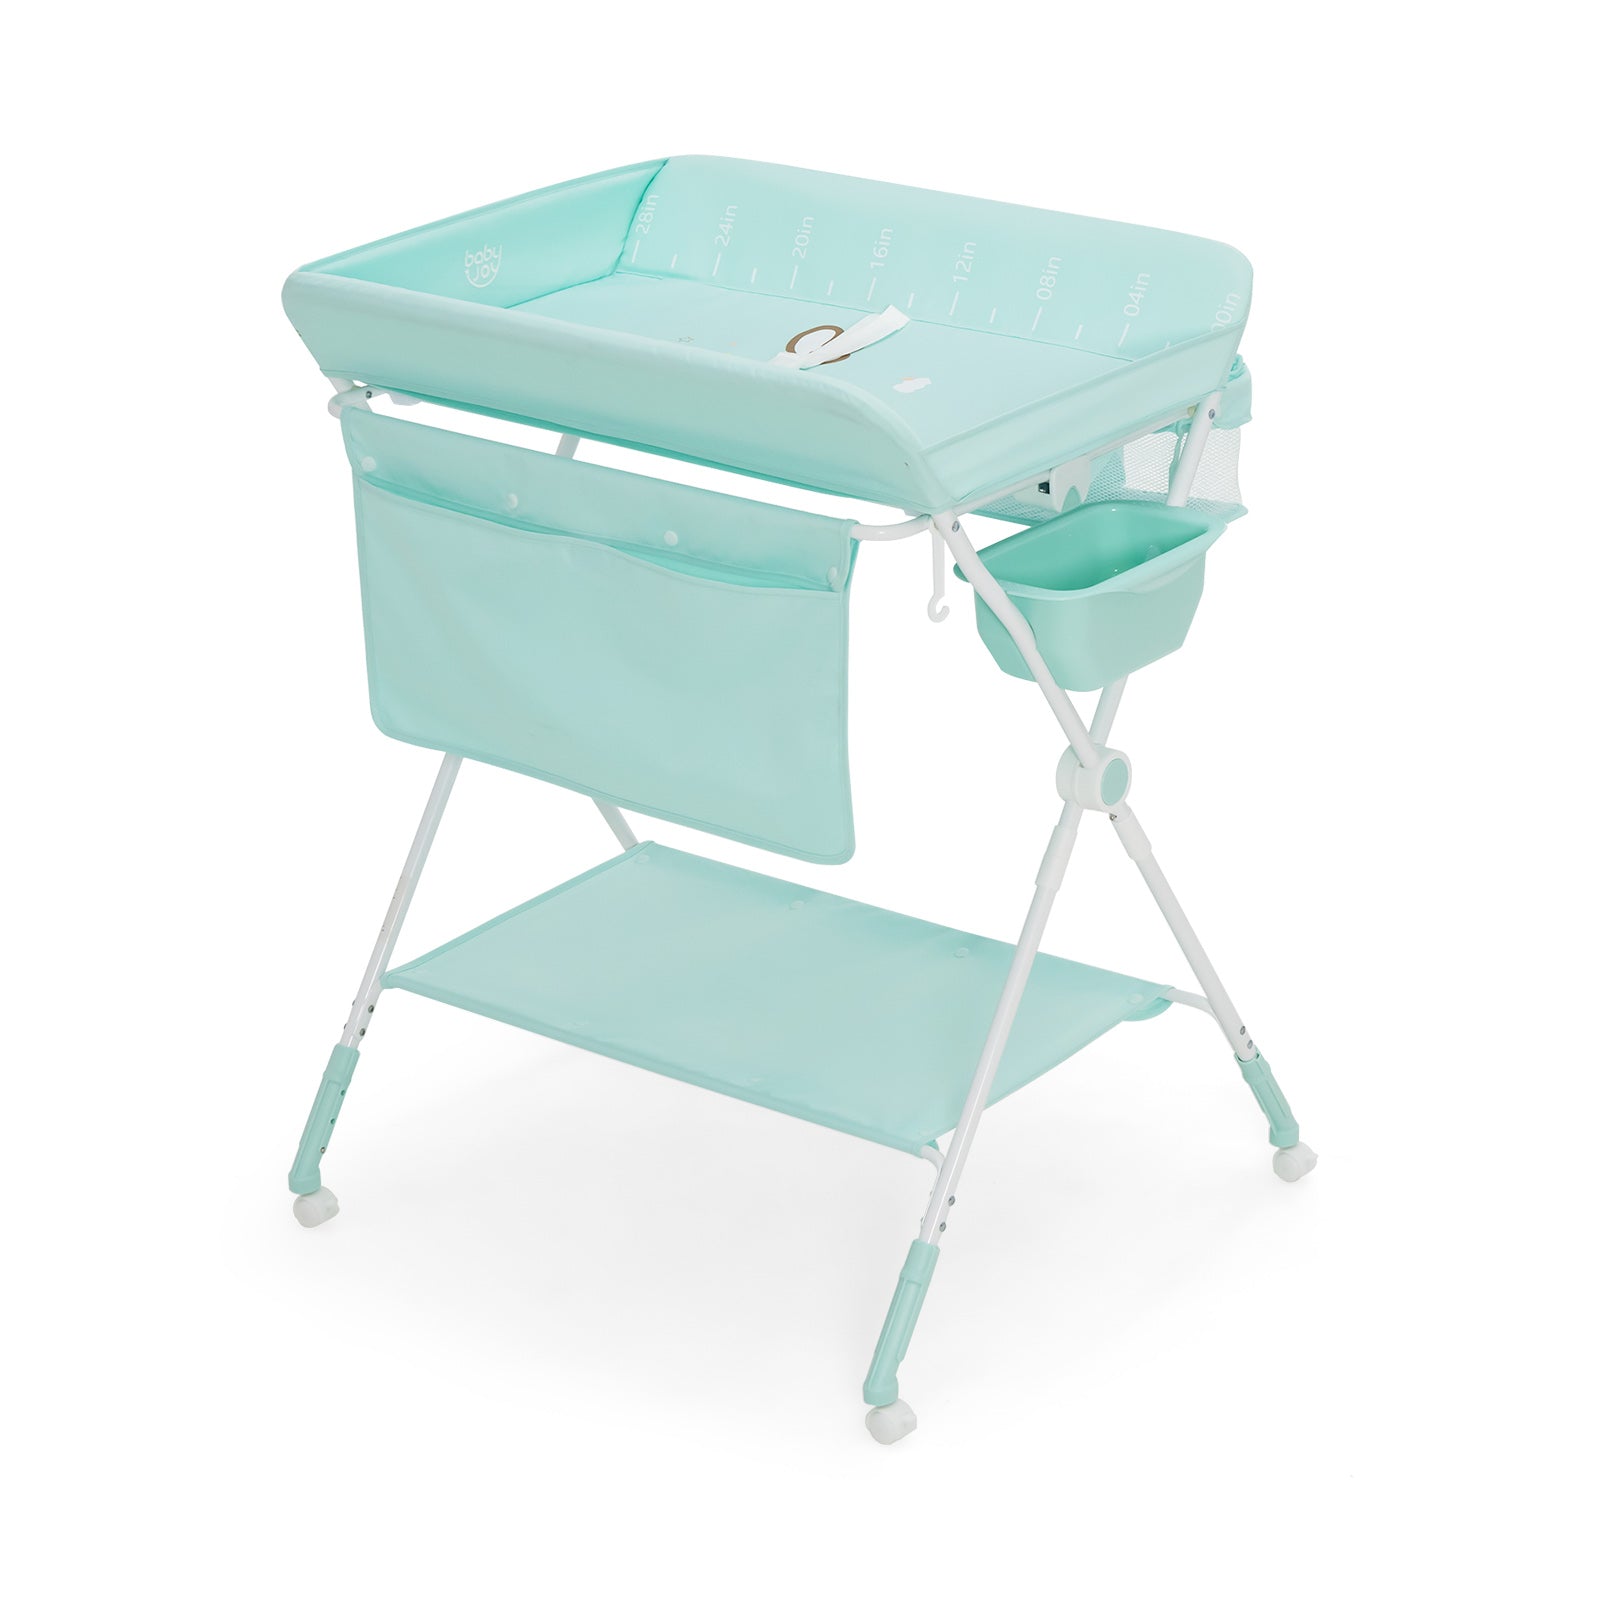  Portable Changing Station - Folding Table for Infant Nursery